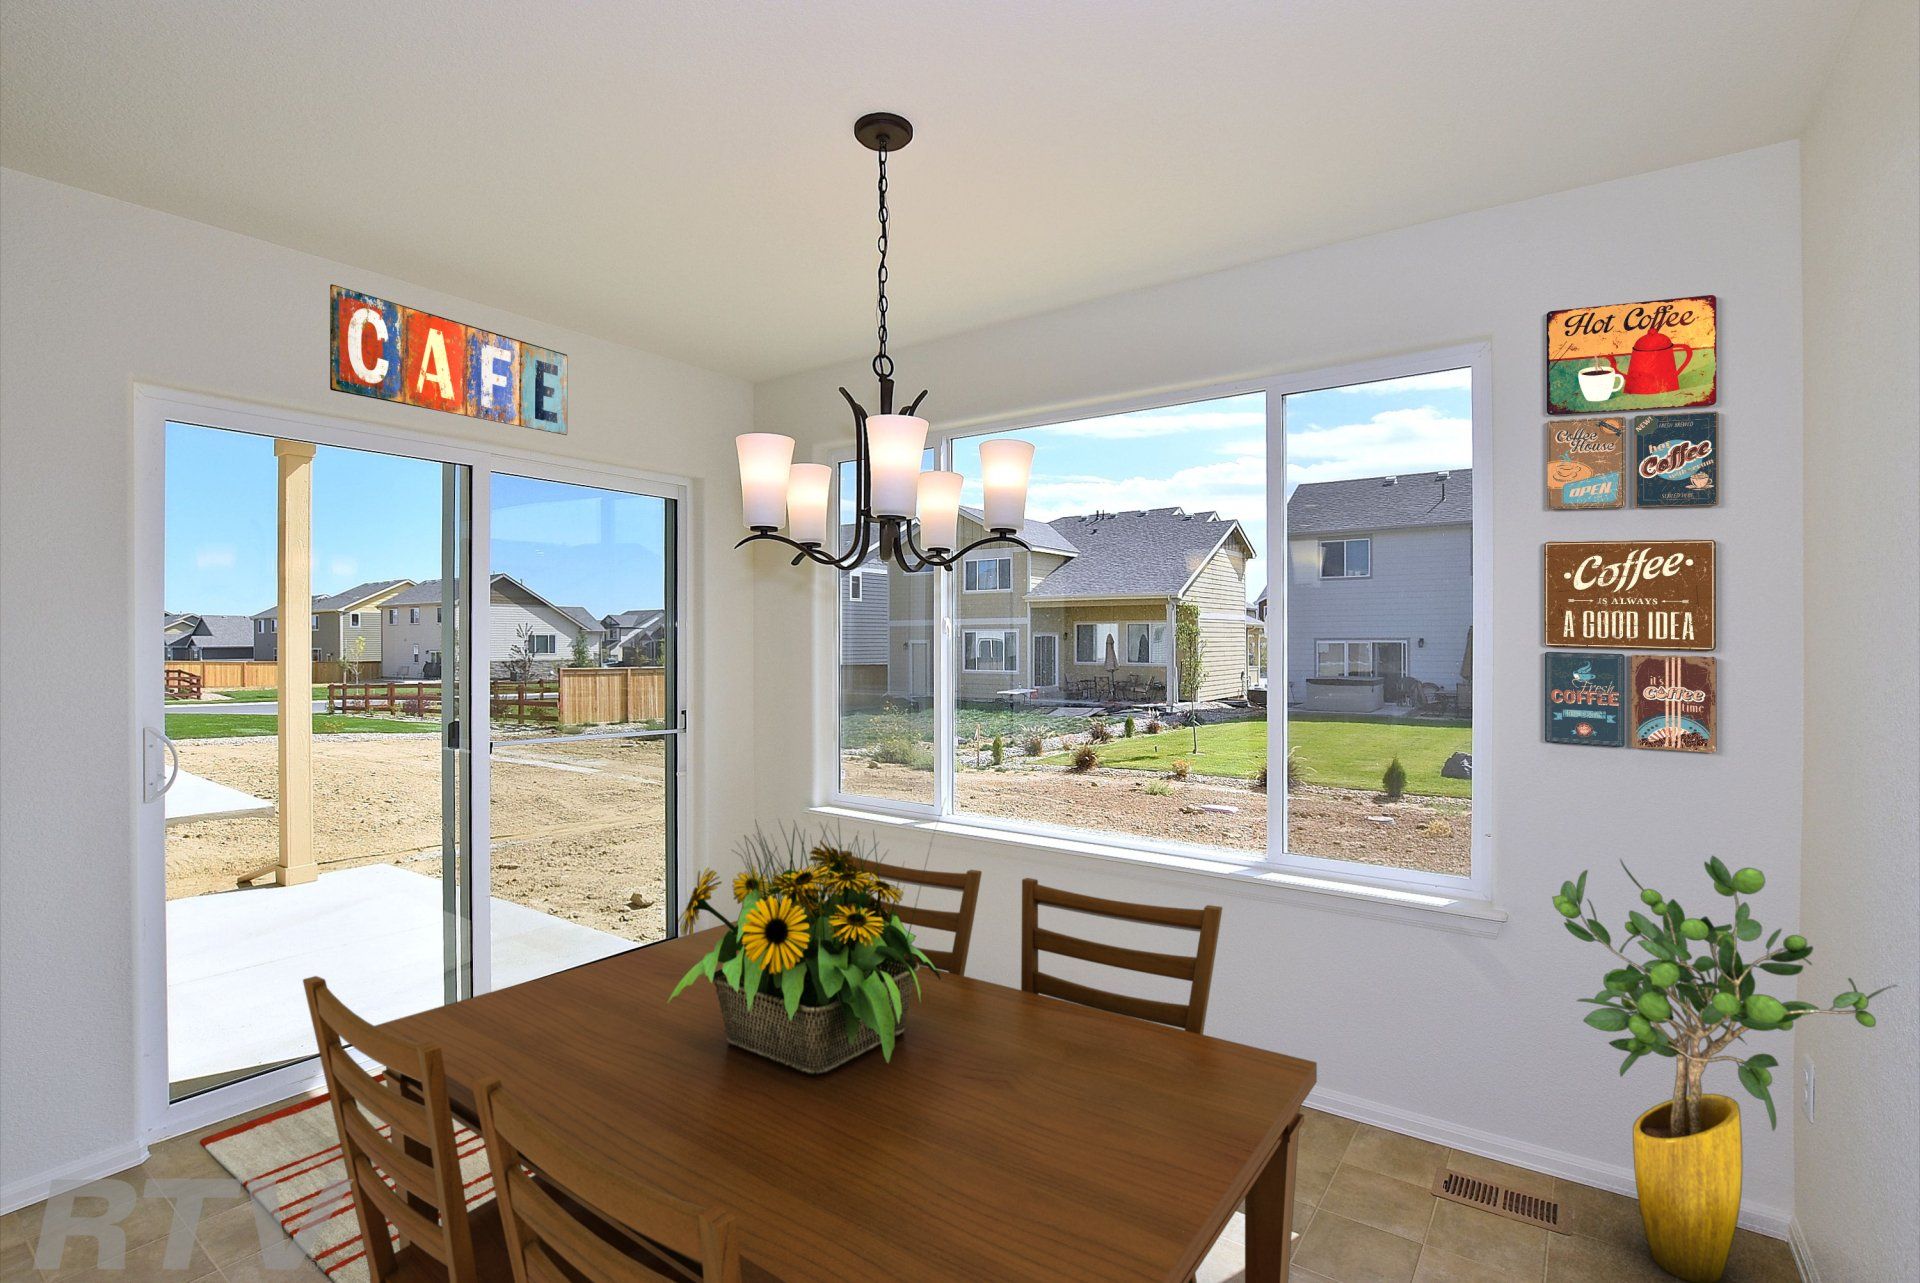 The New Jersey model home dining area